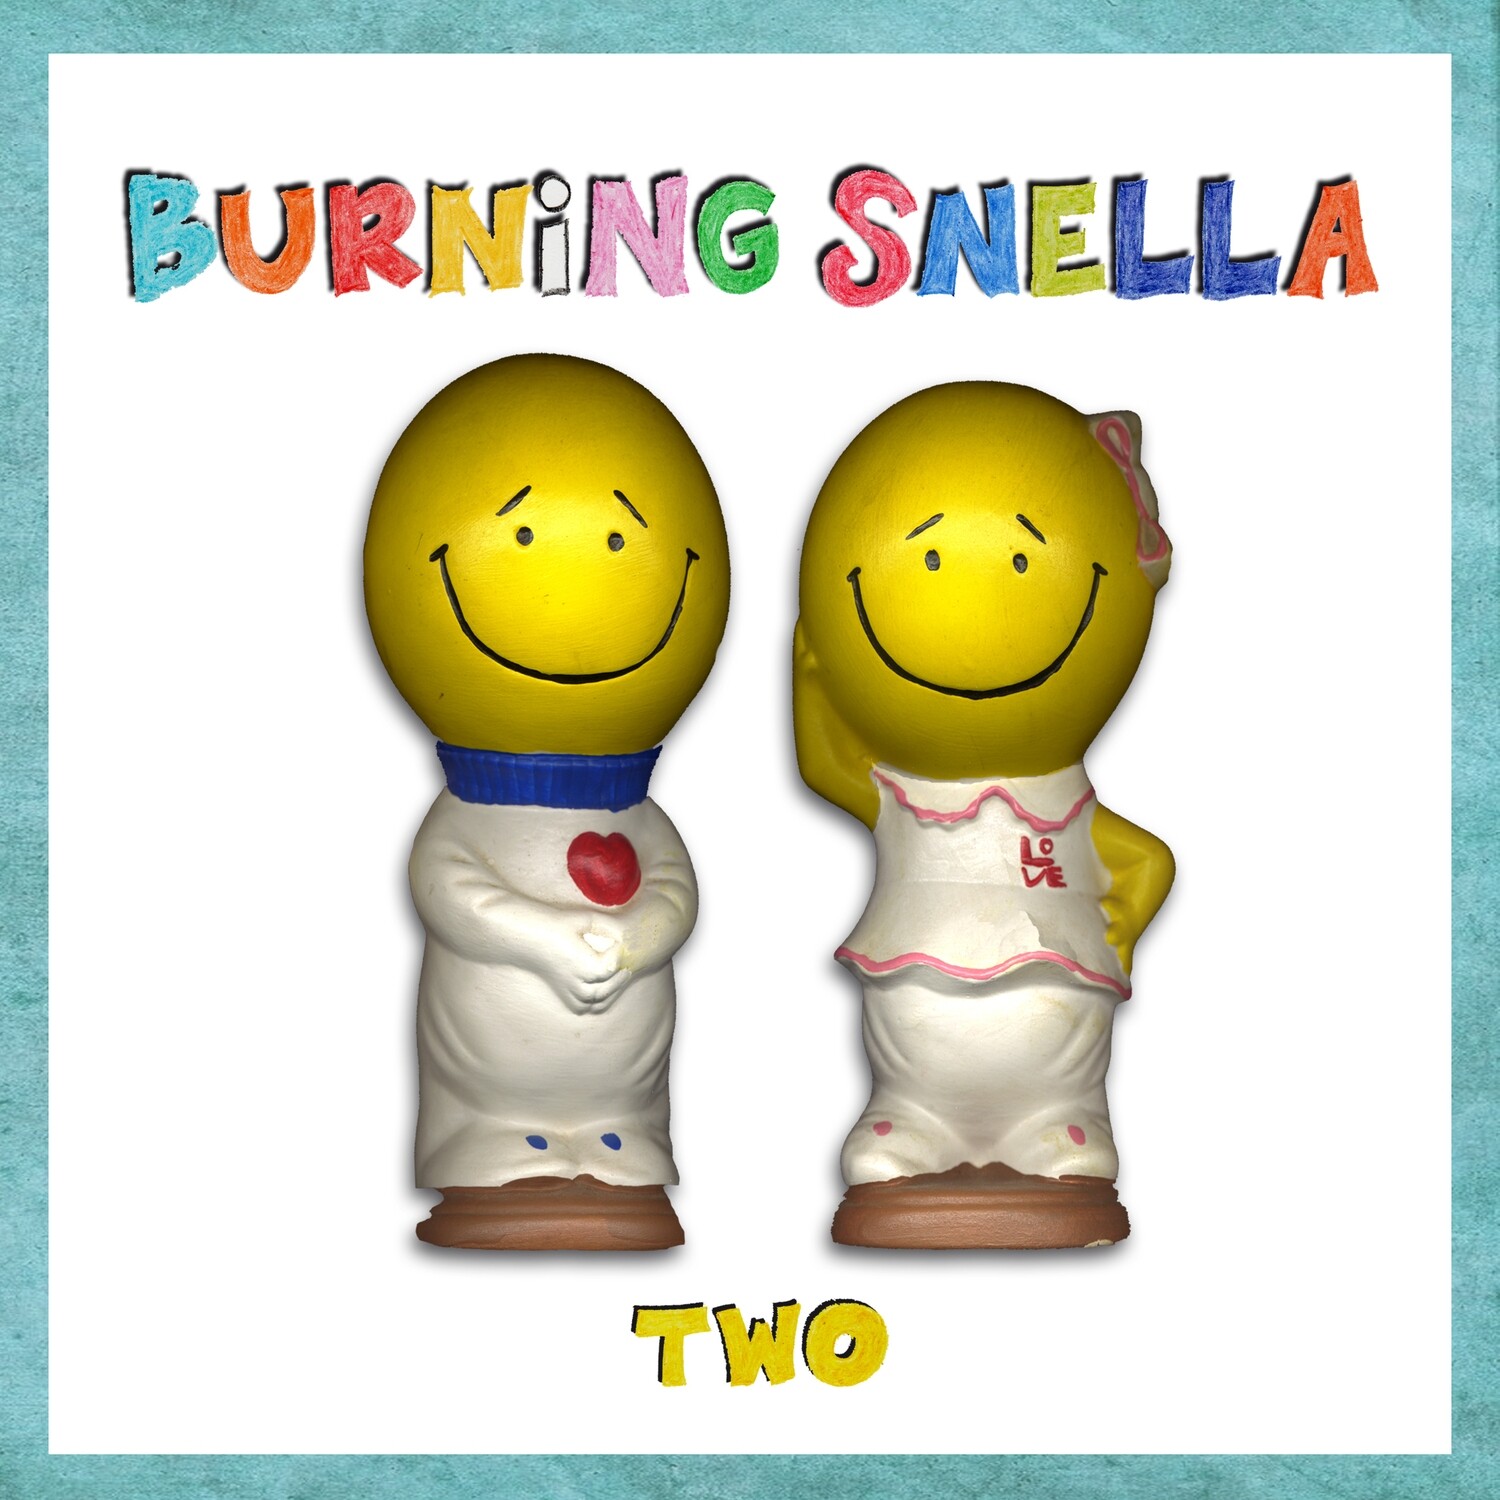 CD - Burning Snella "TWO" AUTOGRAPHED BY THE BAND. (Limited time!)